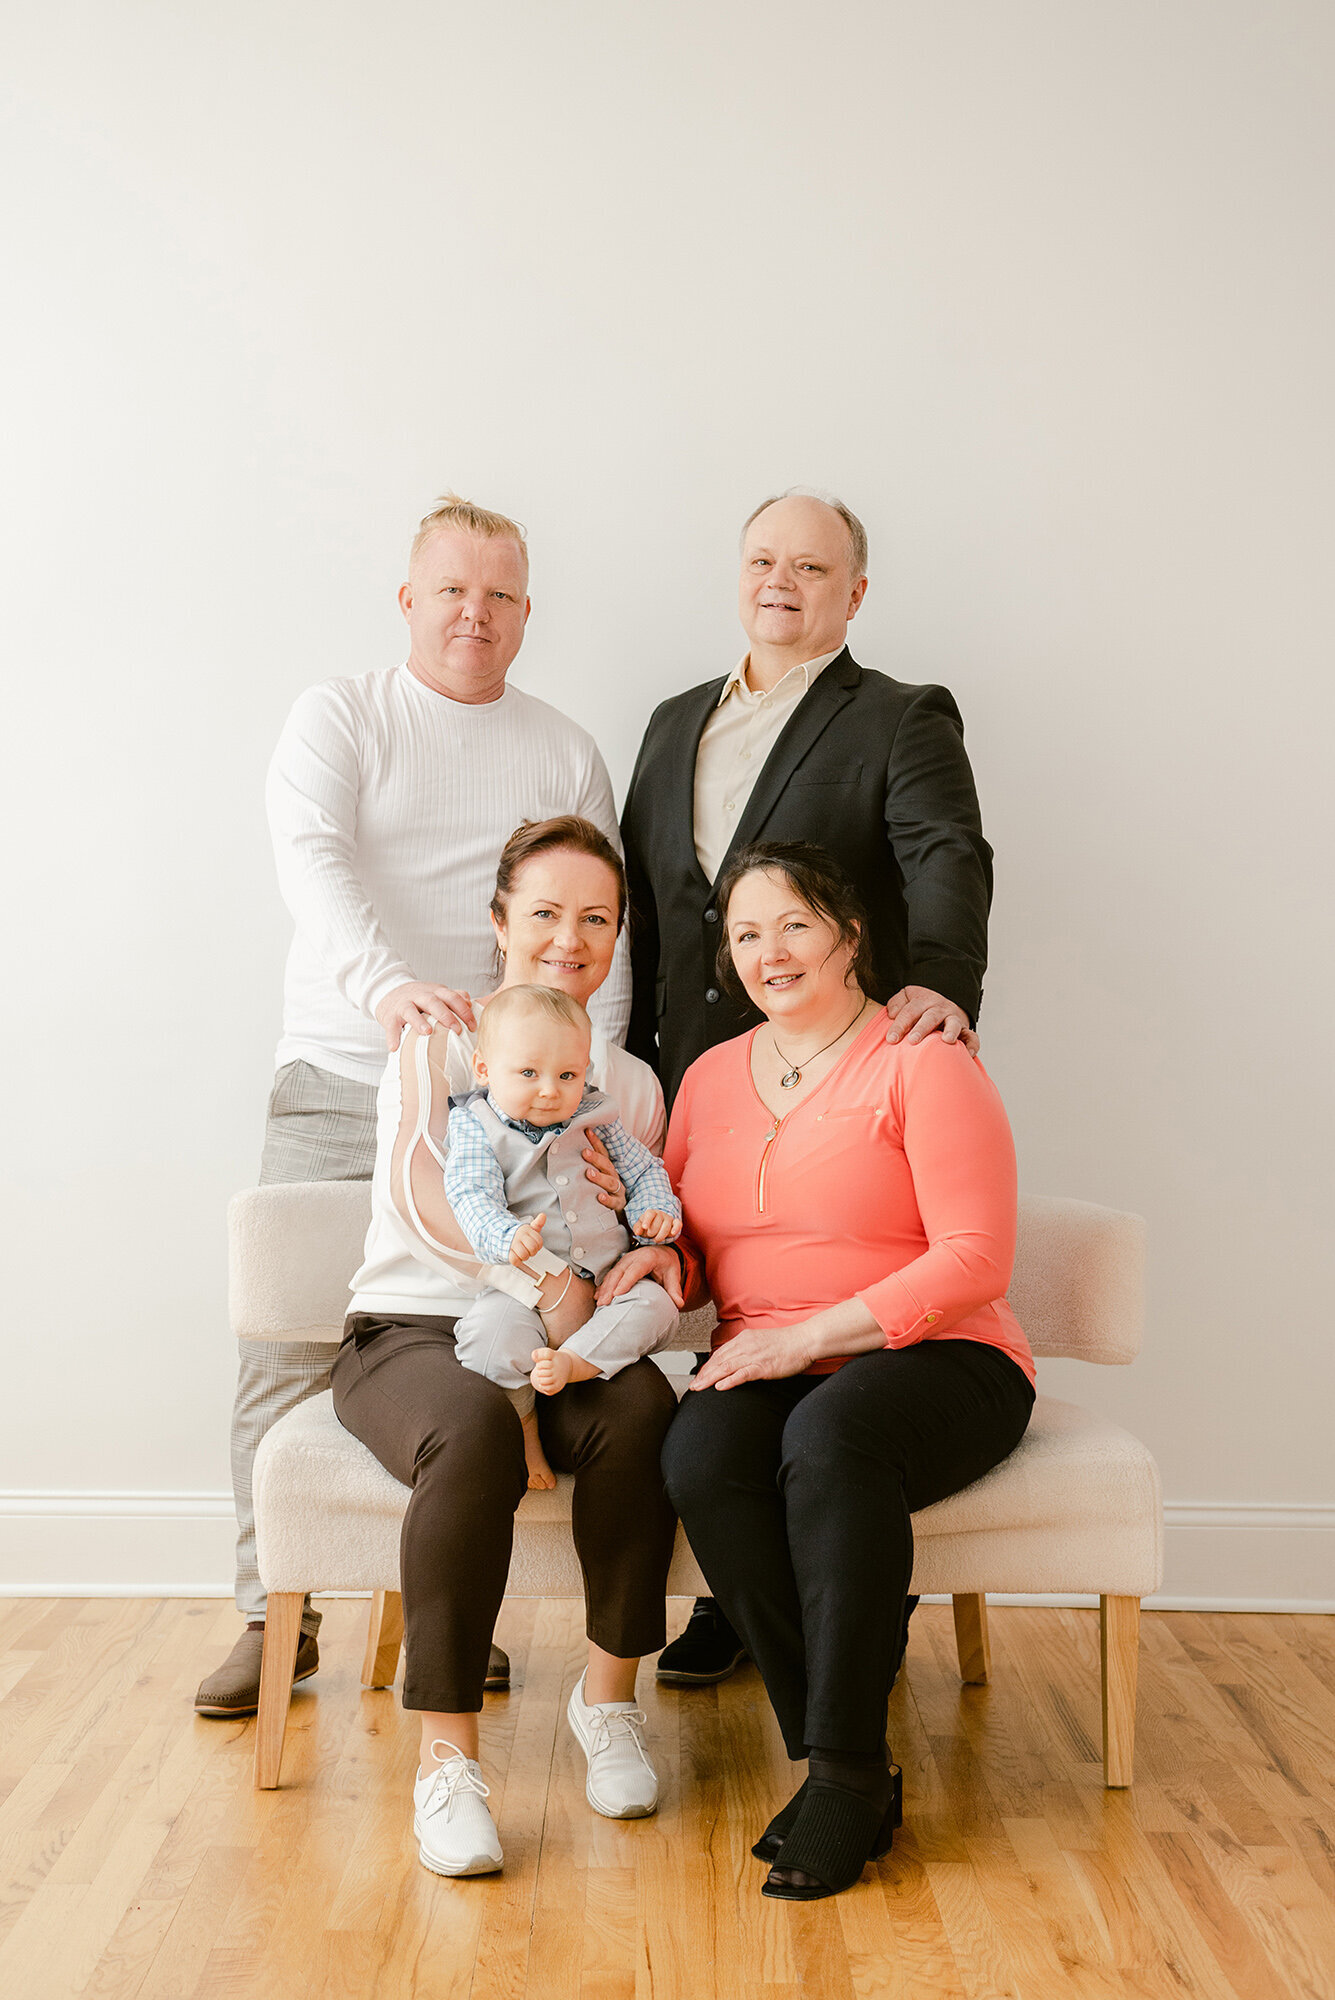 Portrait of a one year old baby with both sets of grandparents in a studio